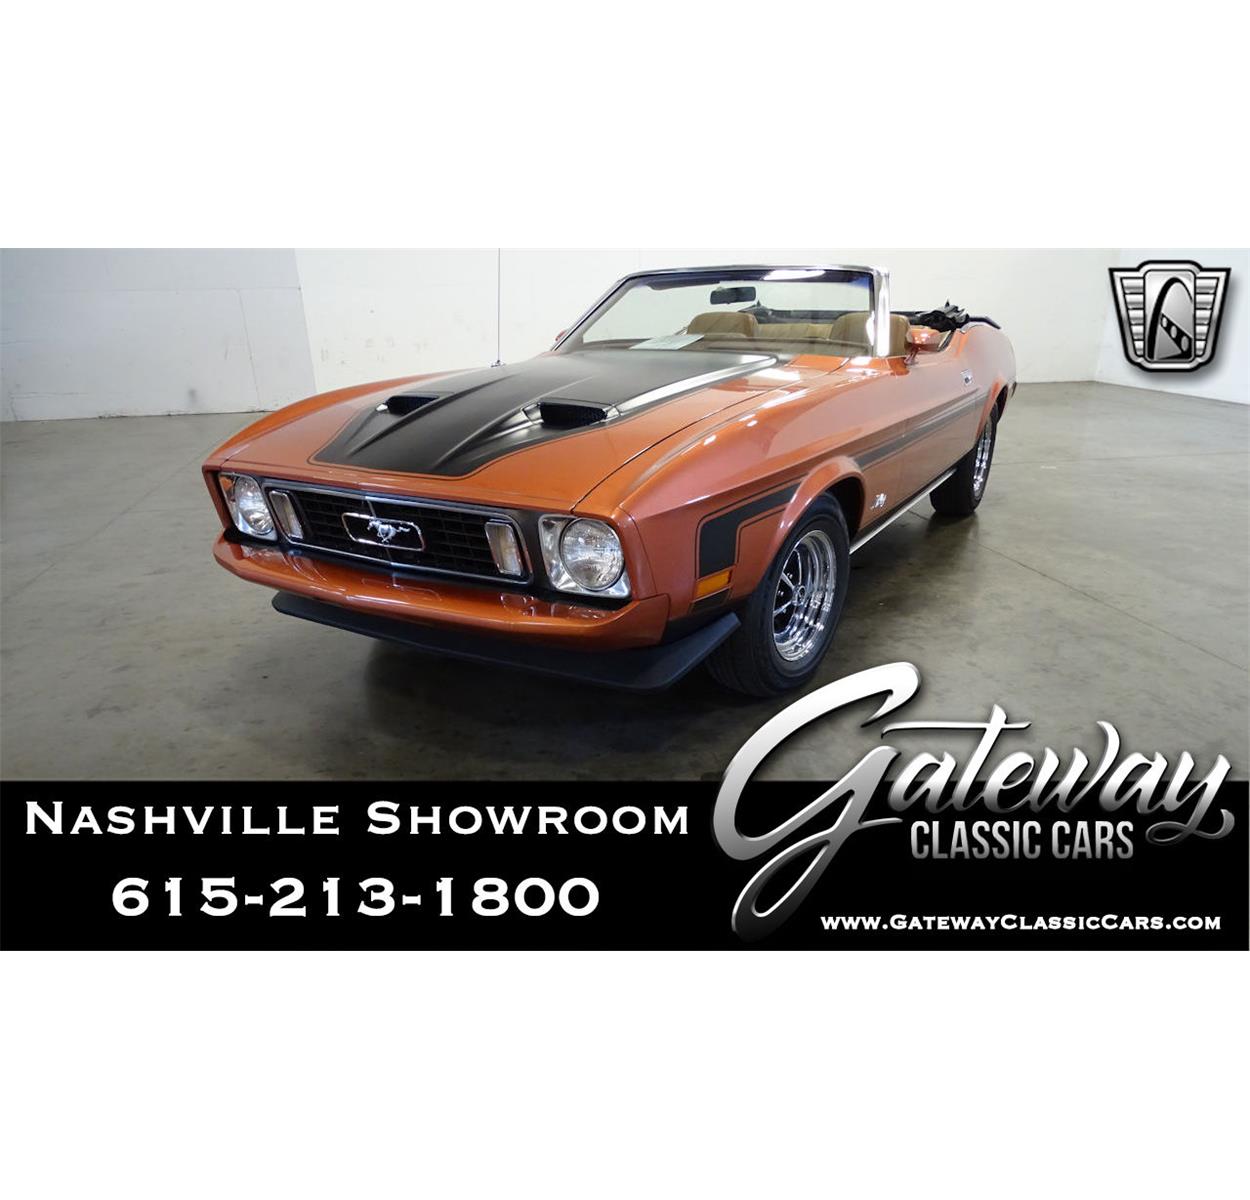 Albums 96+ Images gateway classic cars of nashville photos Completed